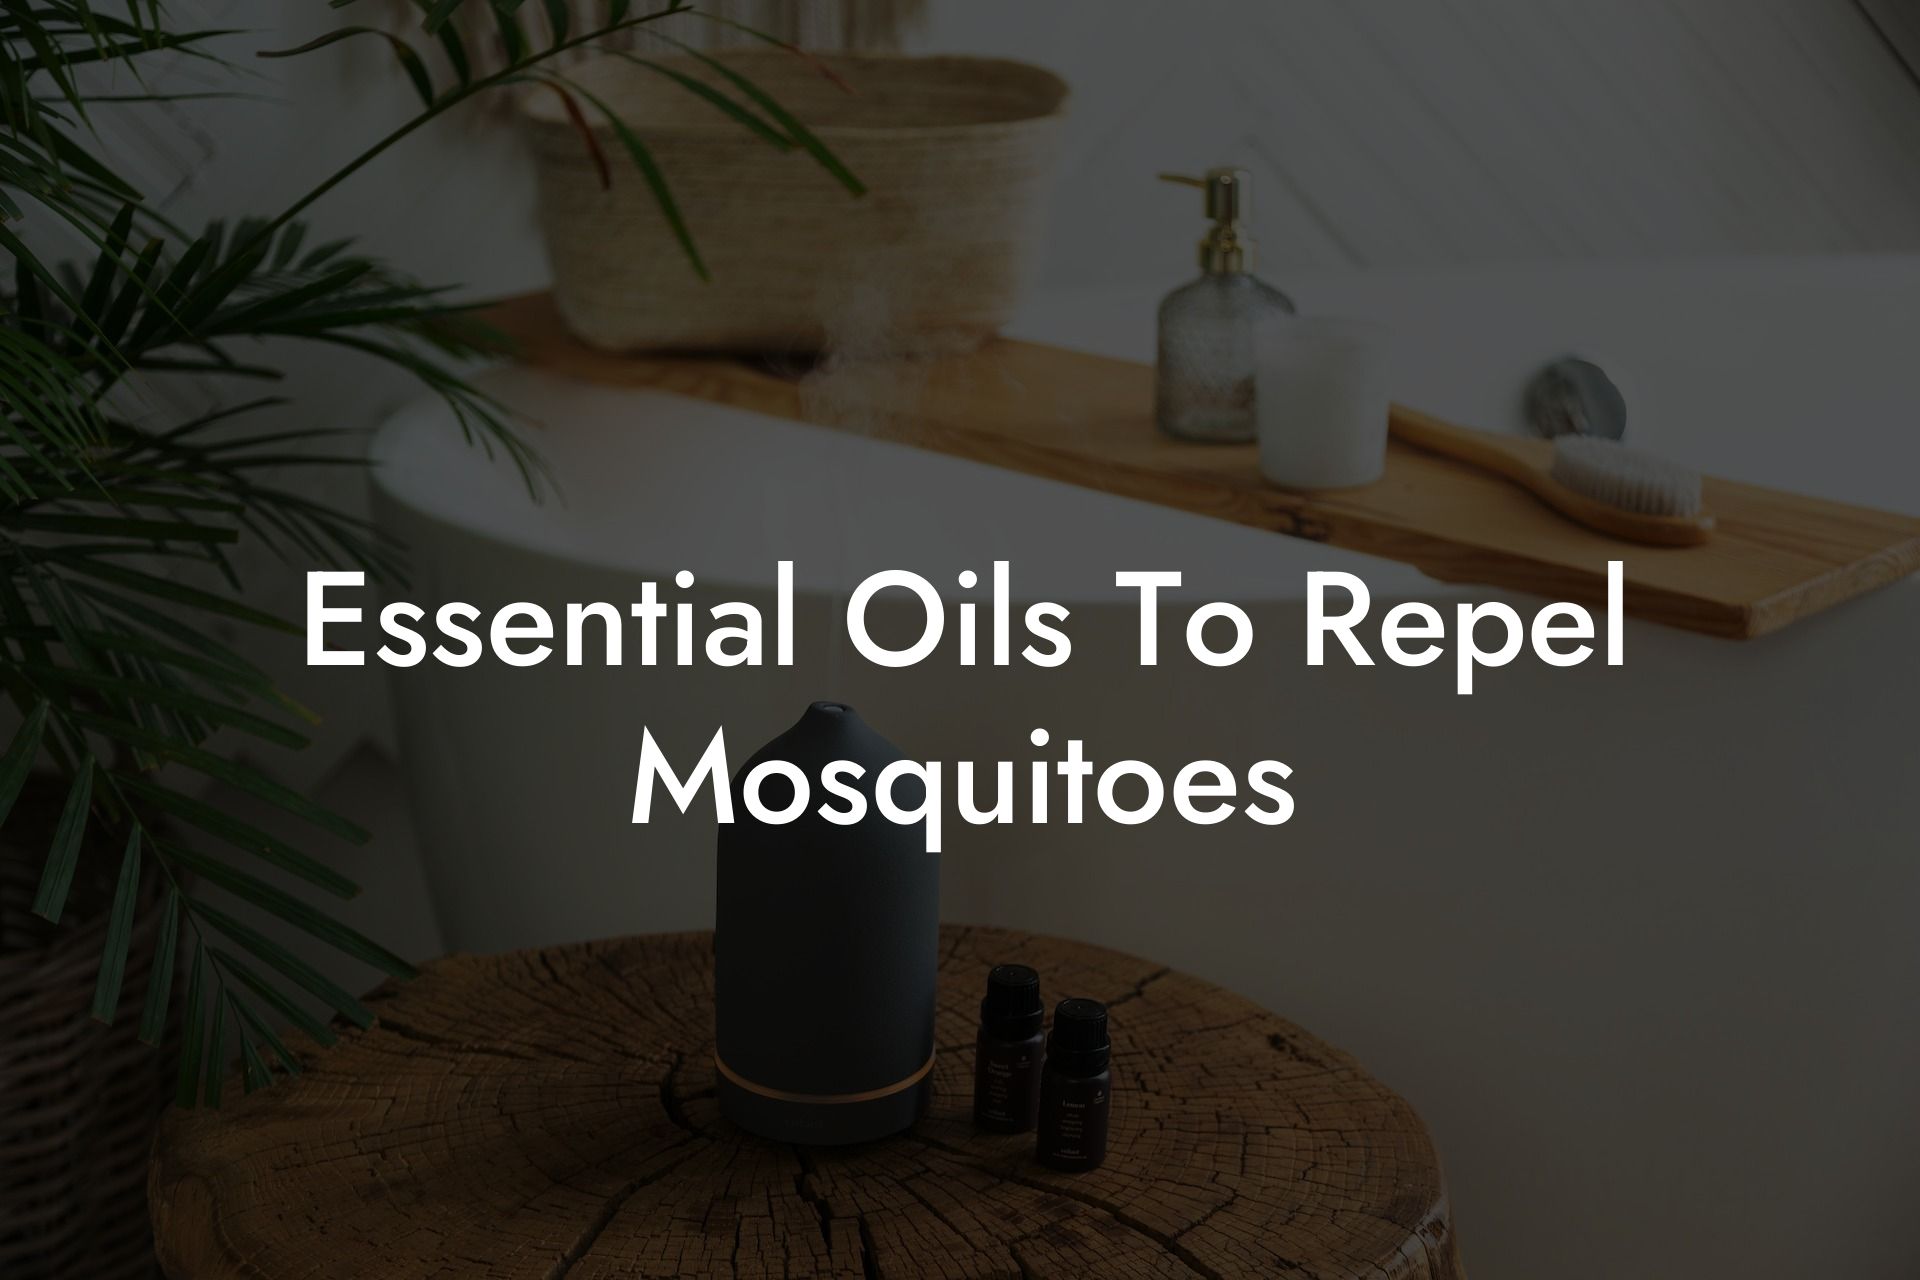 Essential Oils To Repel Mosquitoes